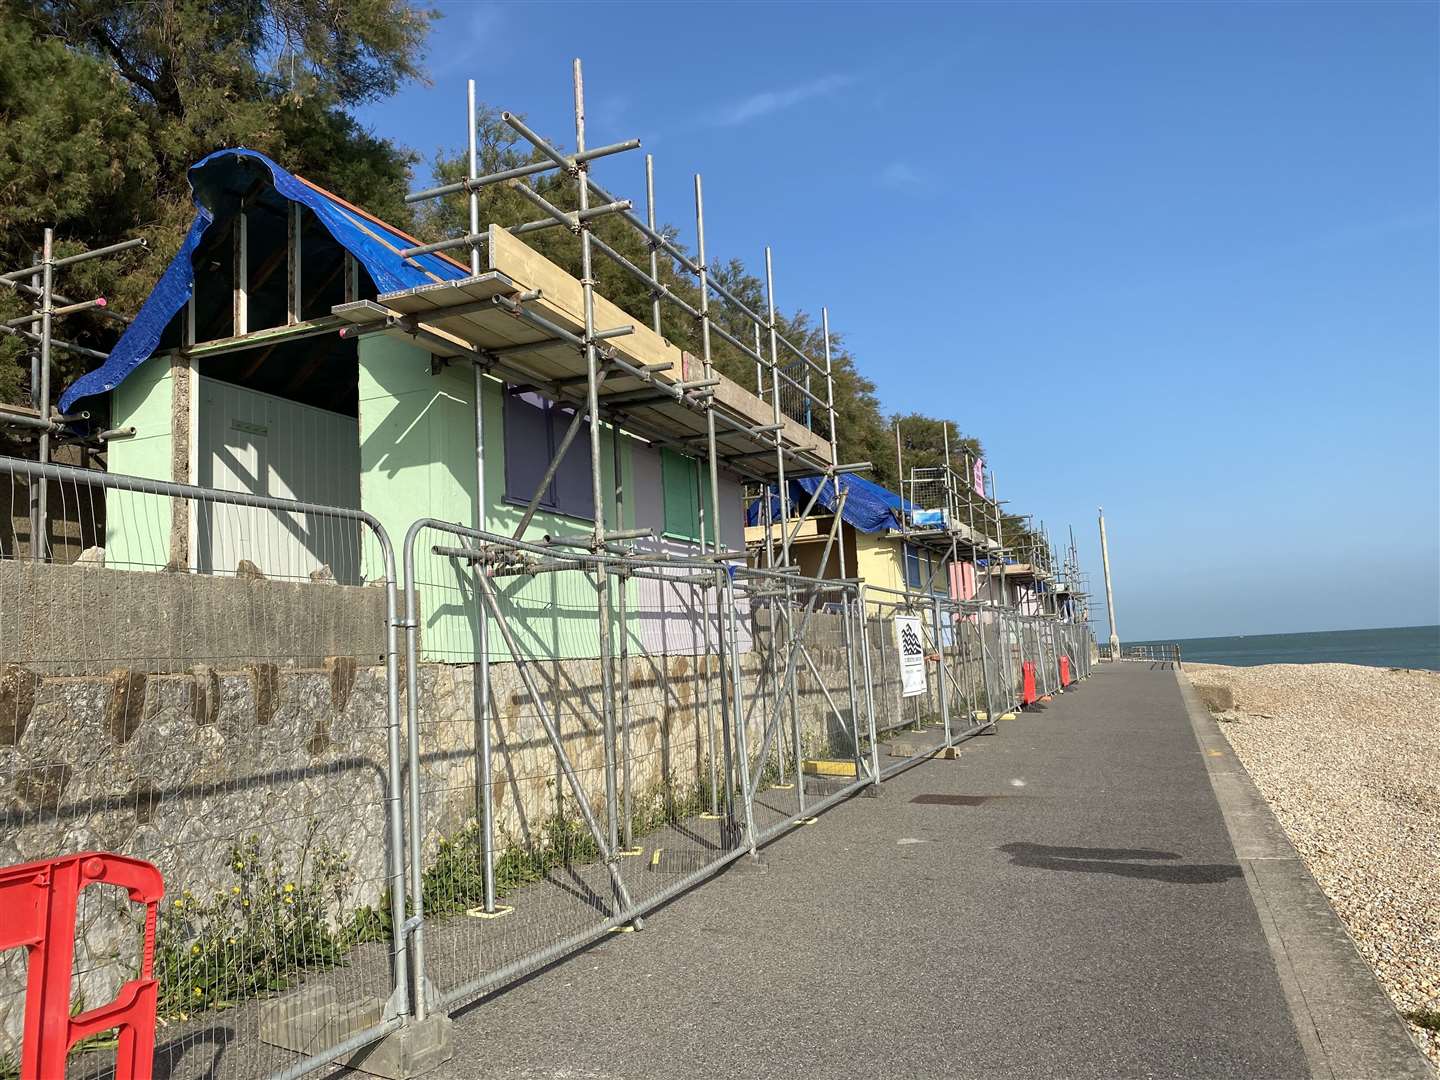 Work is taking place to repair and replace some of the beach huts between Folkestone and Sandgate. Some have already been torn down. Some are being worked on. In addition, wooden huts will be added to the promenade. Some of the existing huts have fallen into disrepair over the years. (42344778)